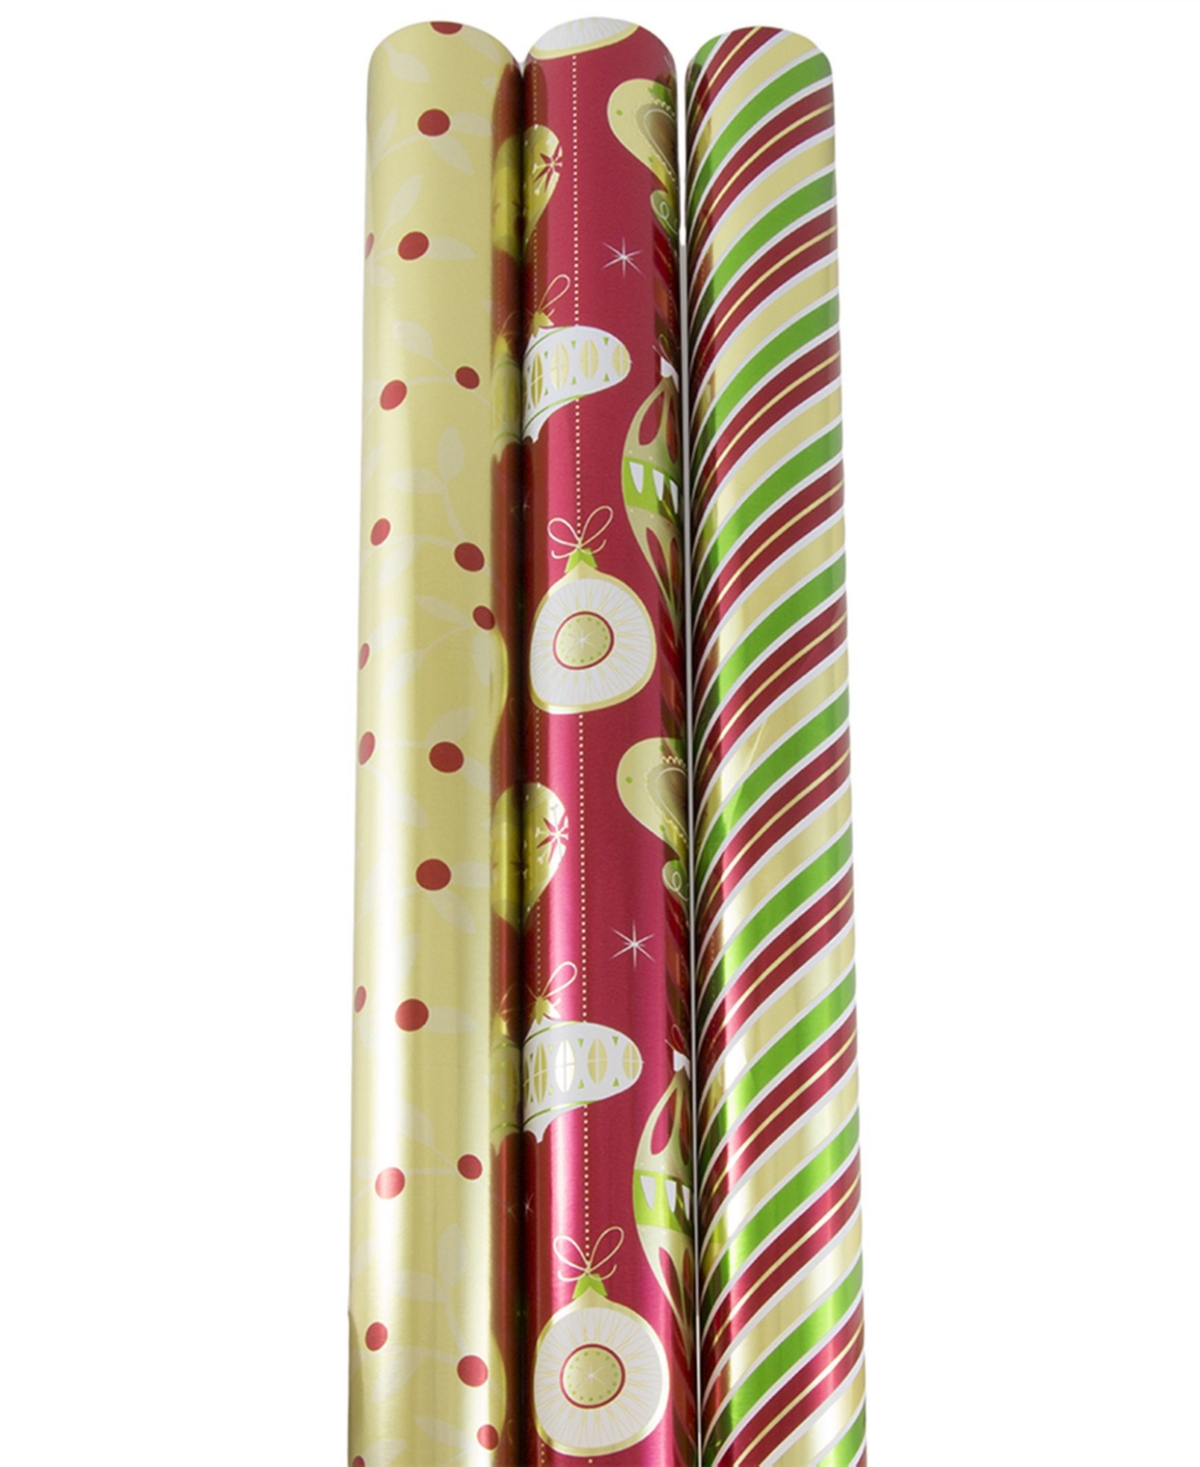 Assorted Gift Wrap 75 Square Feet Christmastime Christmas Foil Wrapping Paper Rolls, Pack of 3 - Assorted